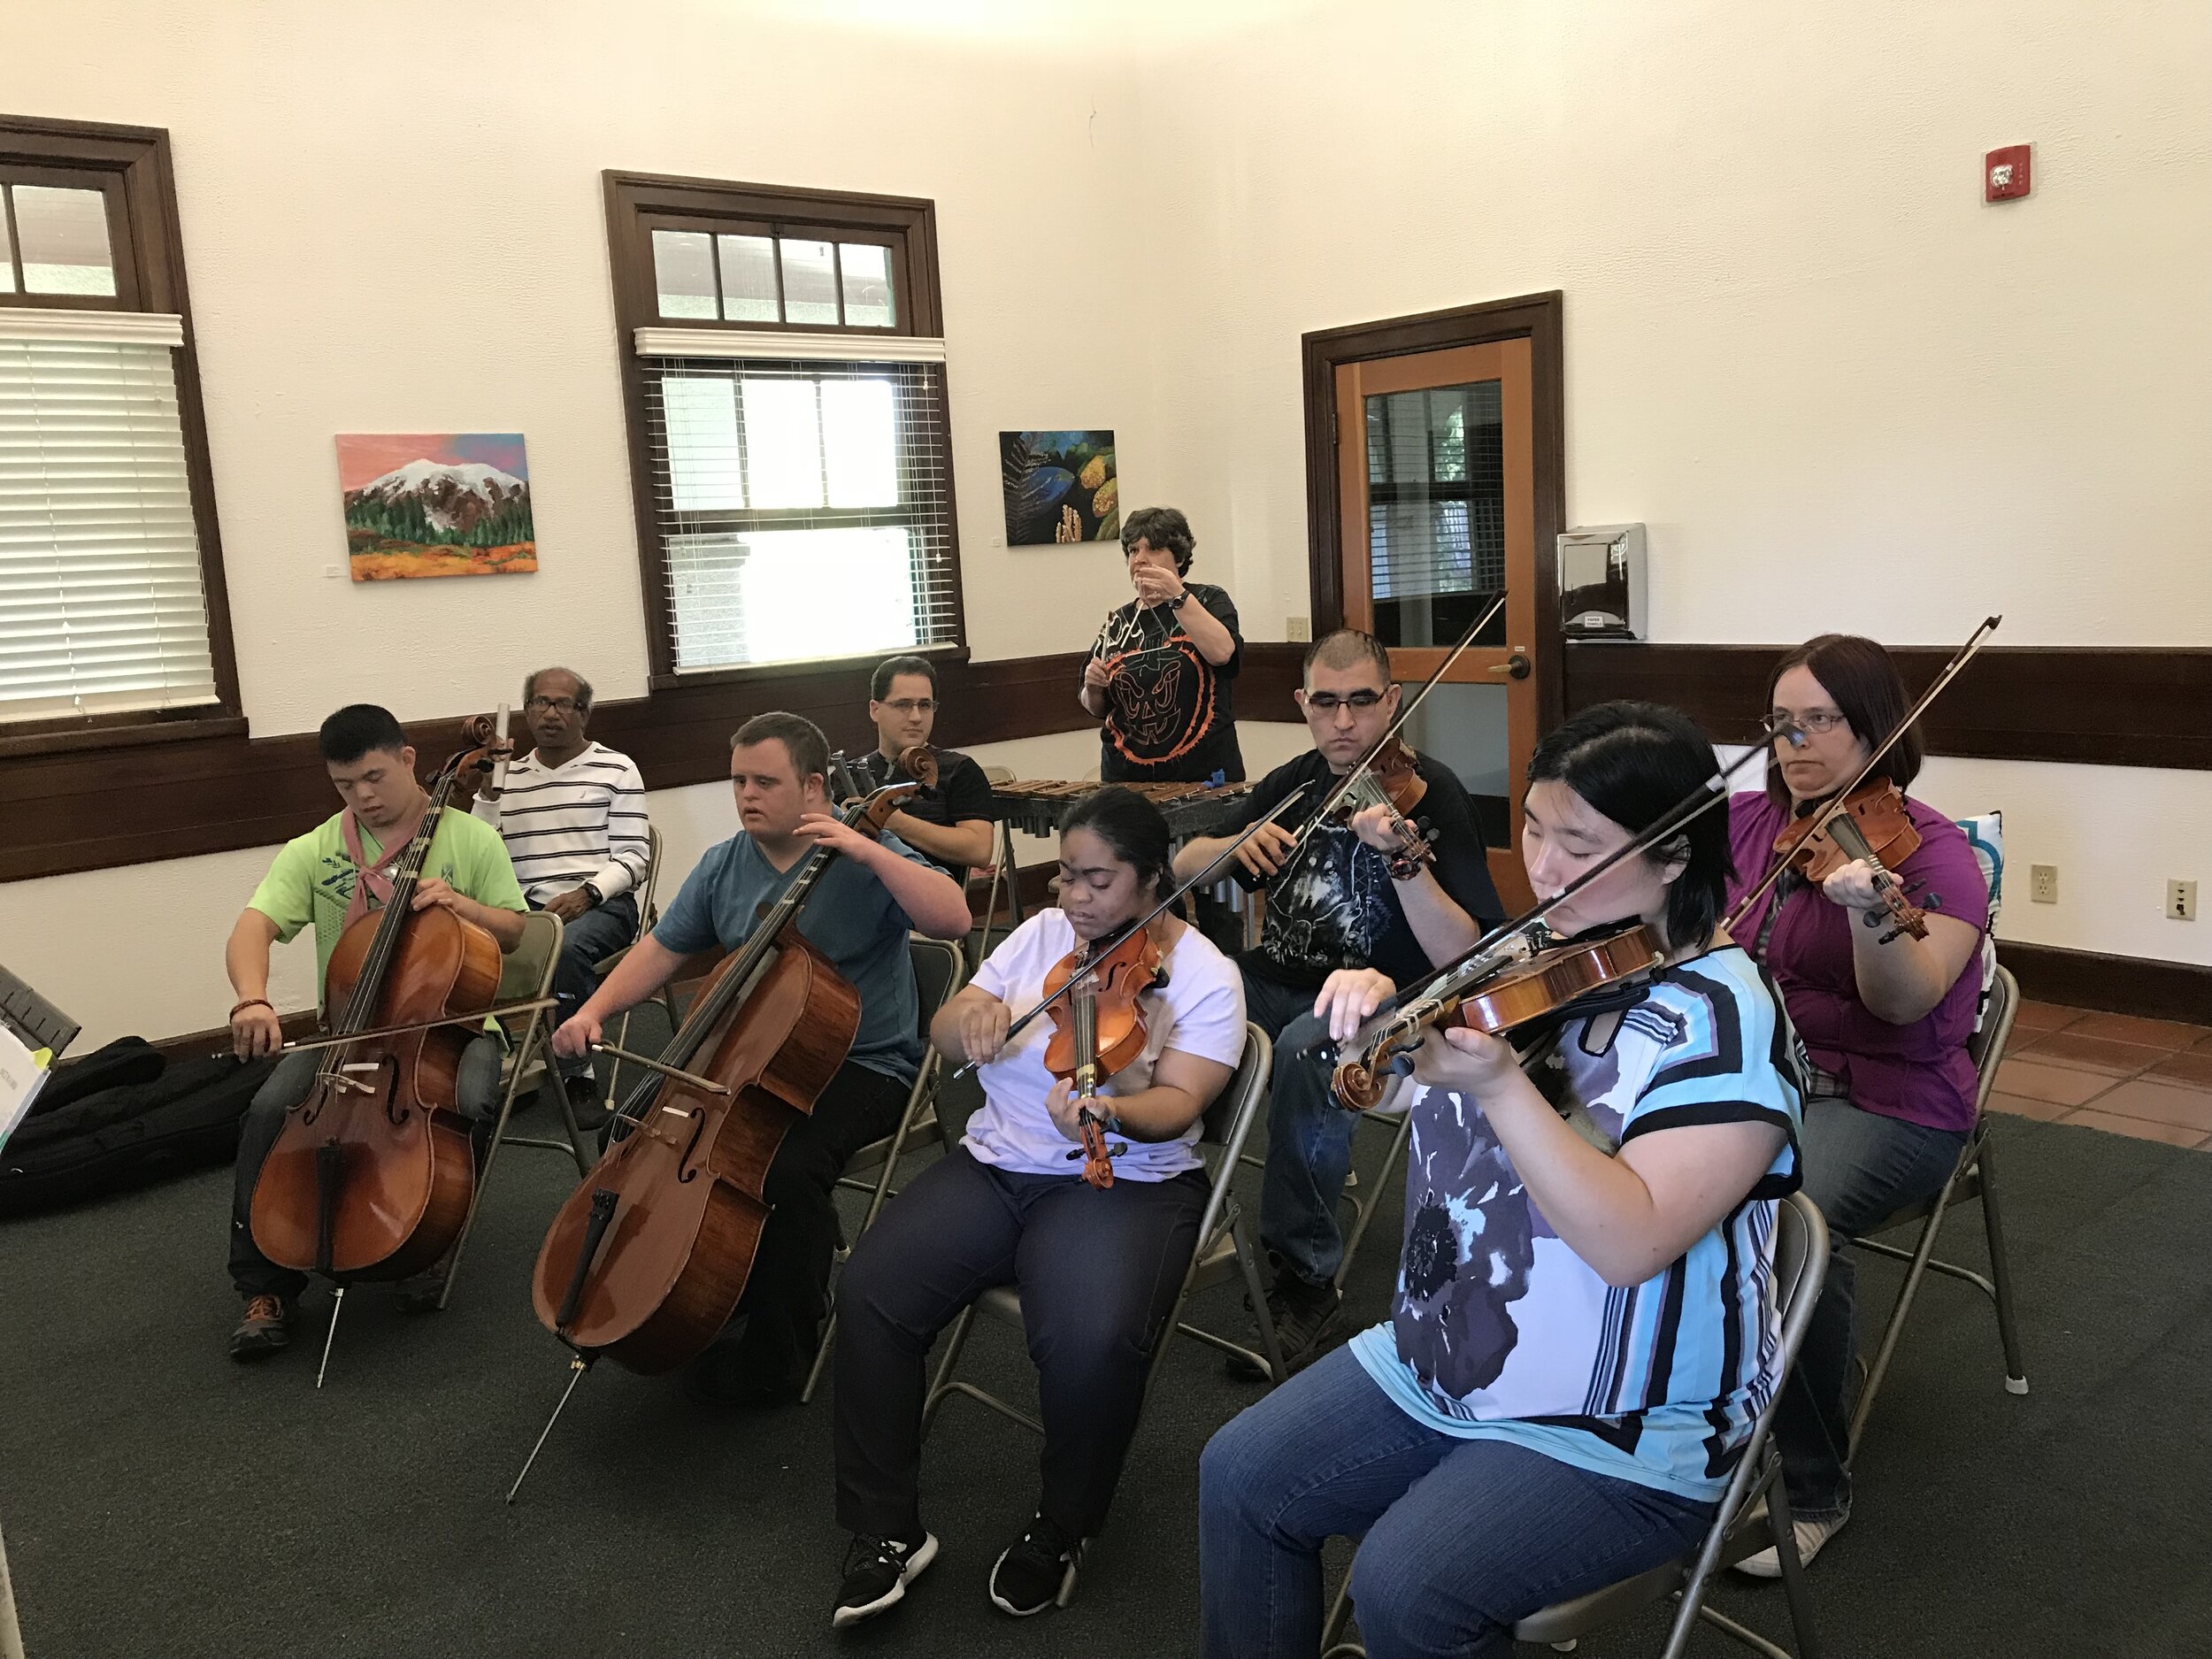  Participants playing in a group with a variety of instruments. The instruments included in this group are cellos, violins, and xylophones.  